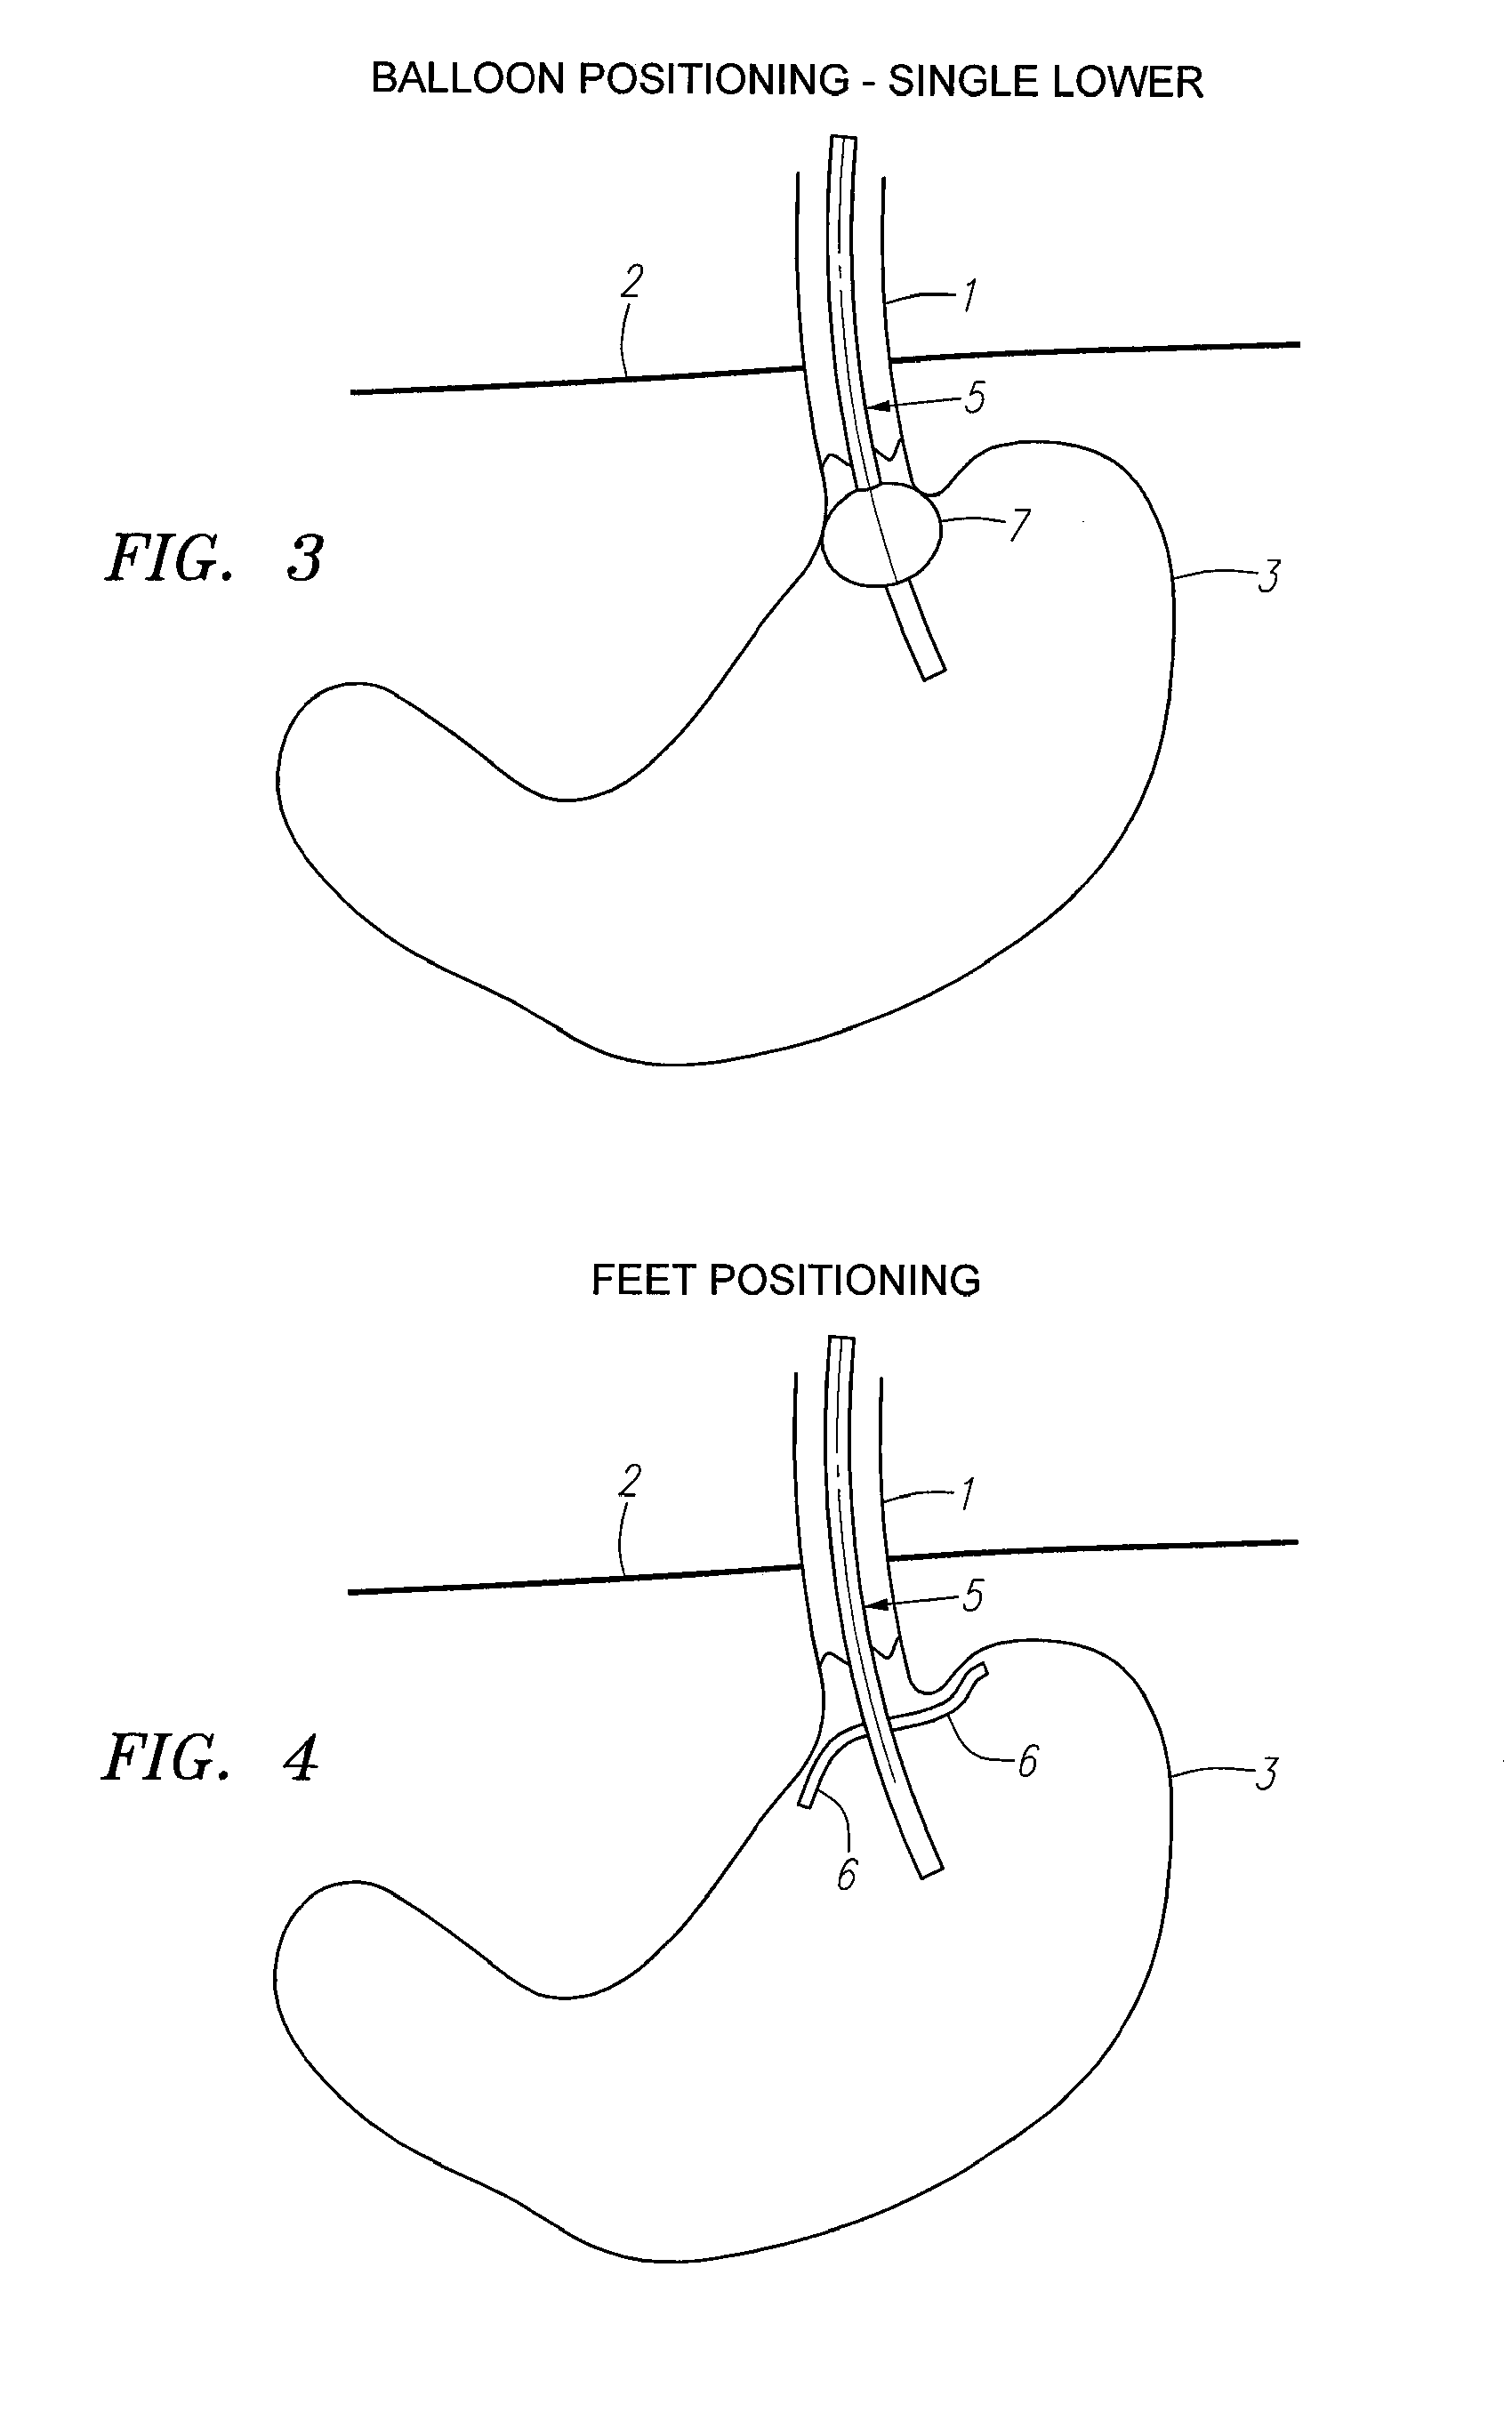 Methods and Apparatus for Testing Disruption of a Vagal Nerve